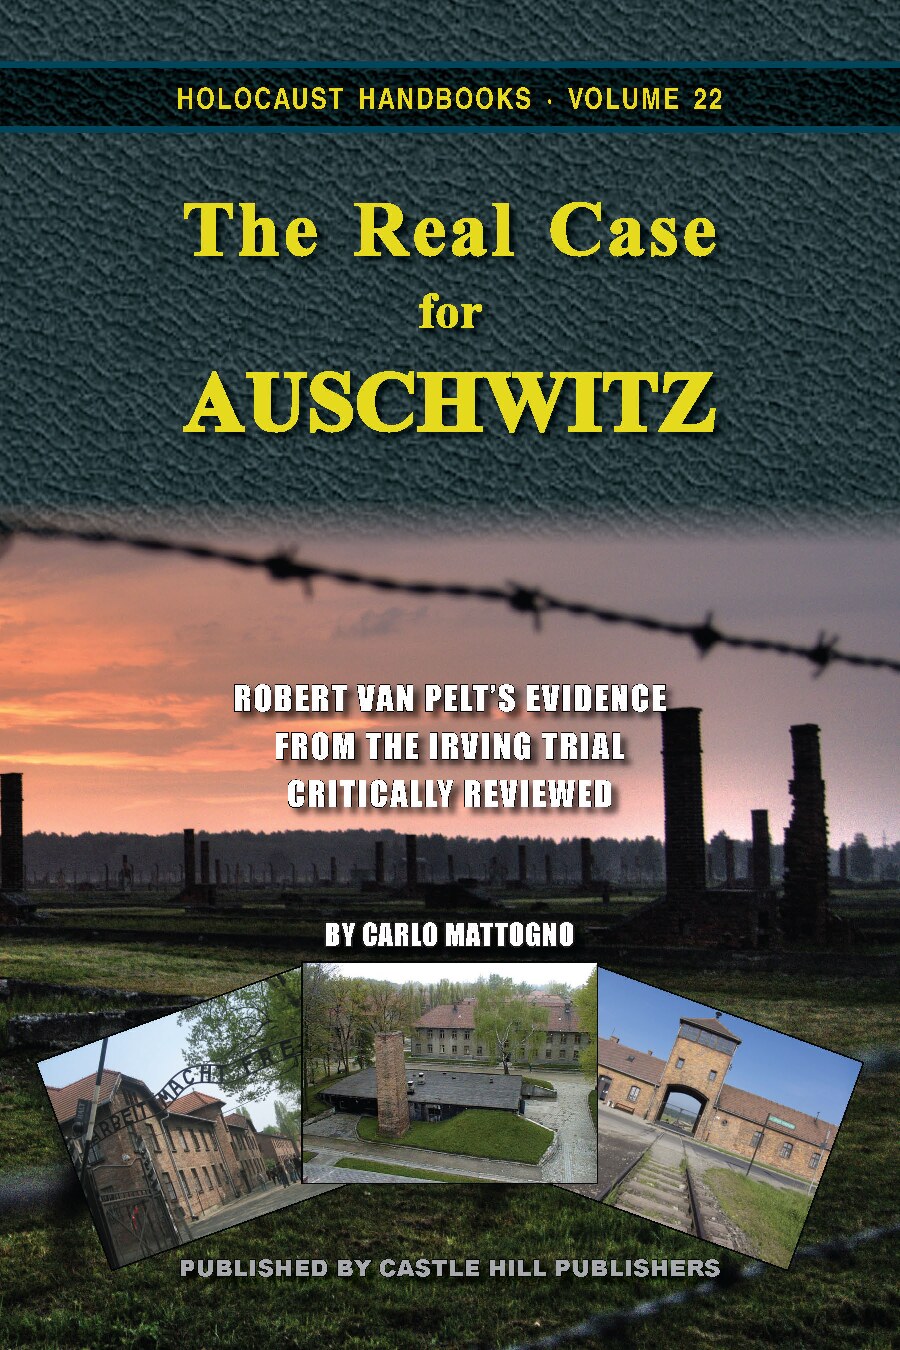 The Real Case for Auschwitz